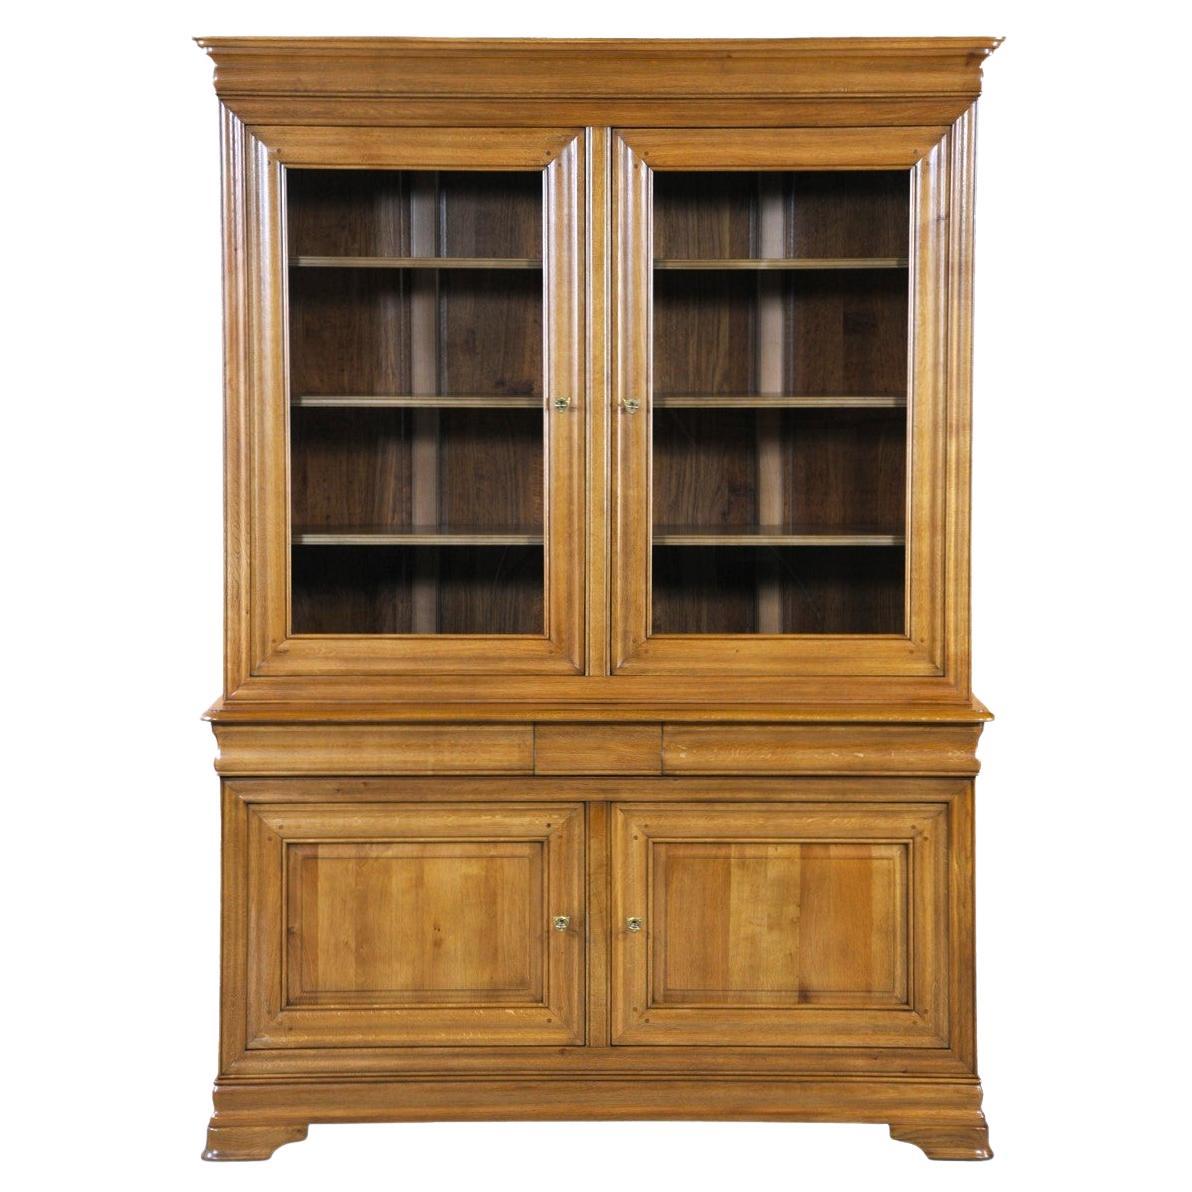 Display 2-door 2-body bookcase, French Louis-Philippe style in solid oak